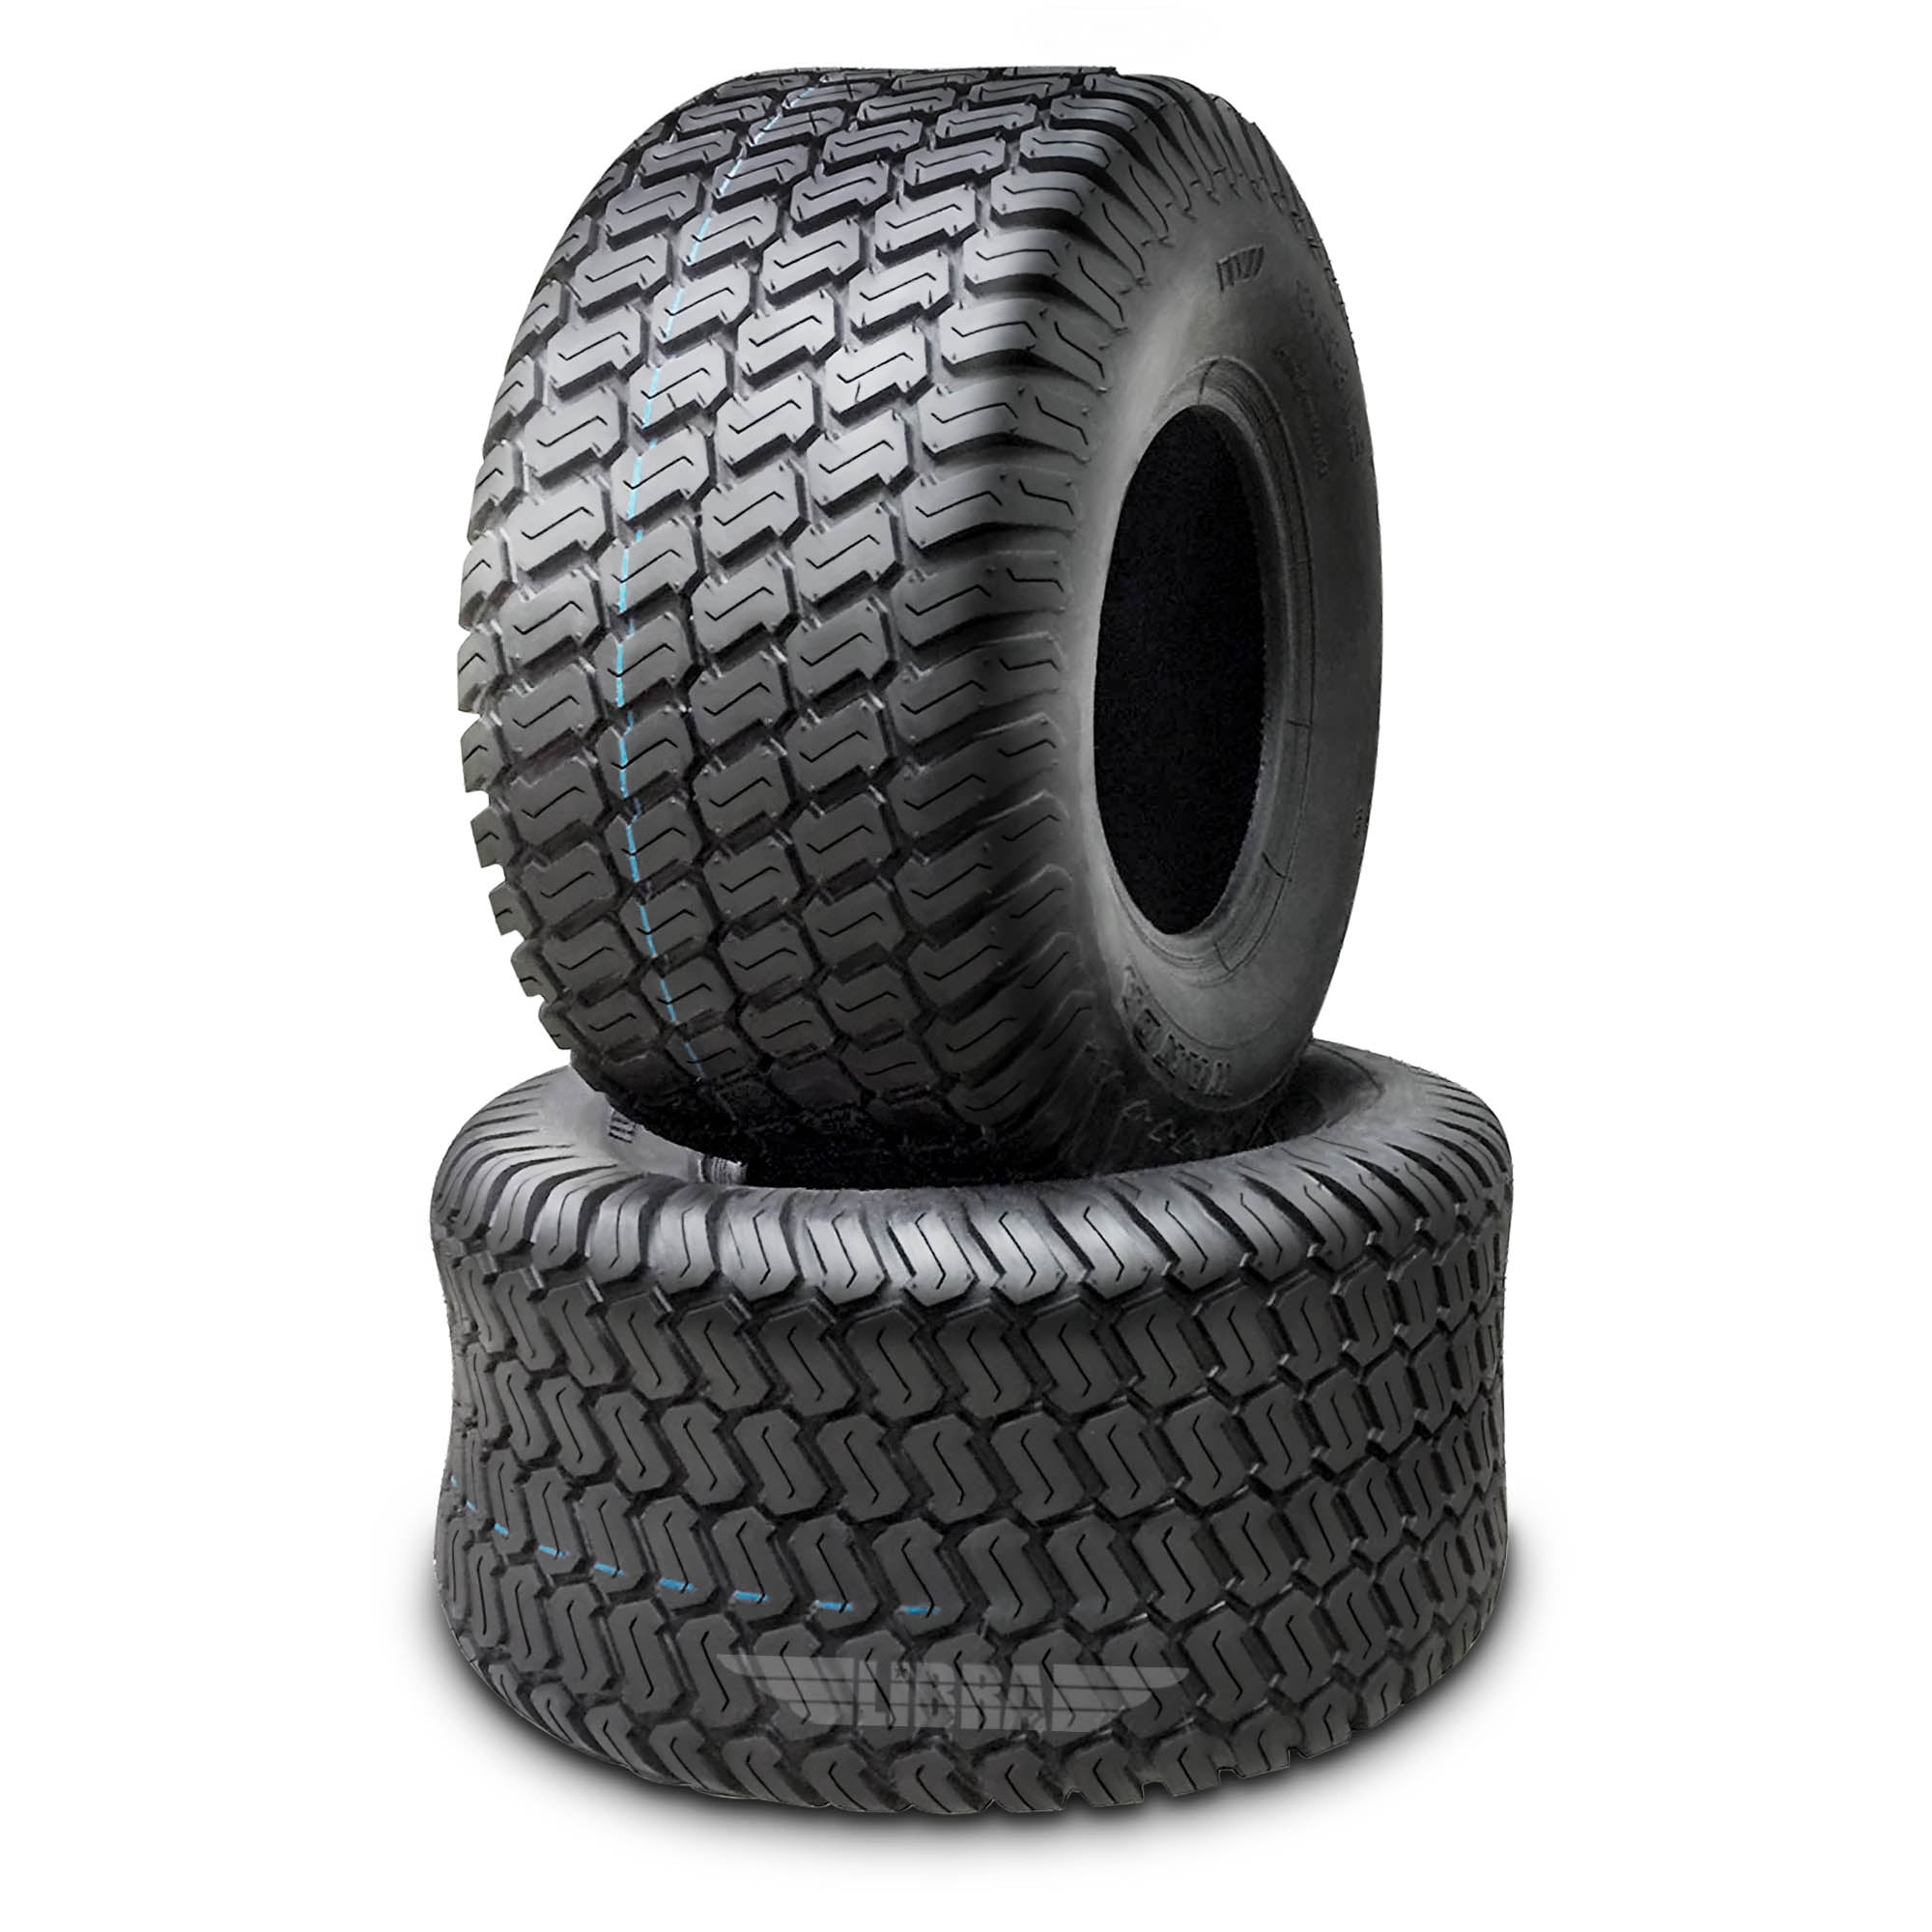 11x4.00-5 Turf and Lawn Tires AIRLOC P332 MT 4 Ply NEW TIRES 11x400-5 SET OF 2 